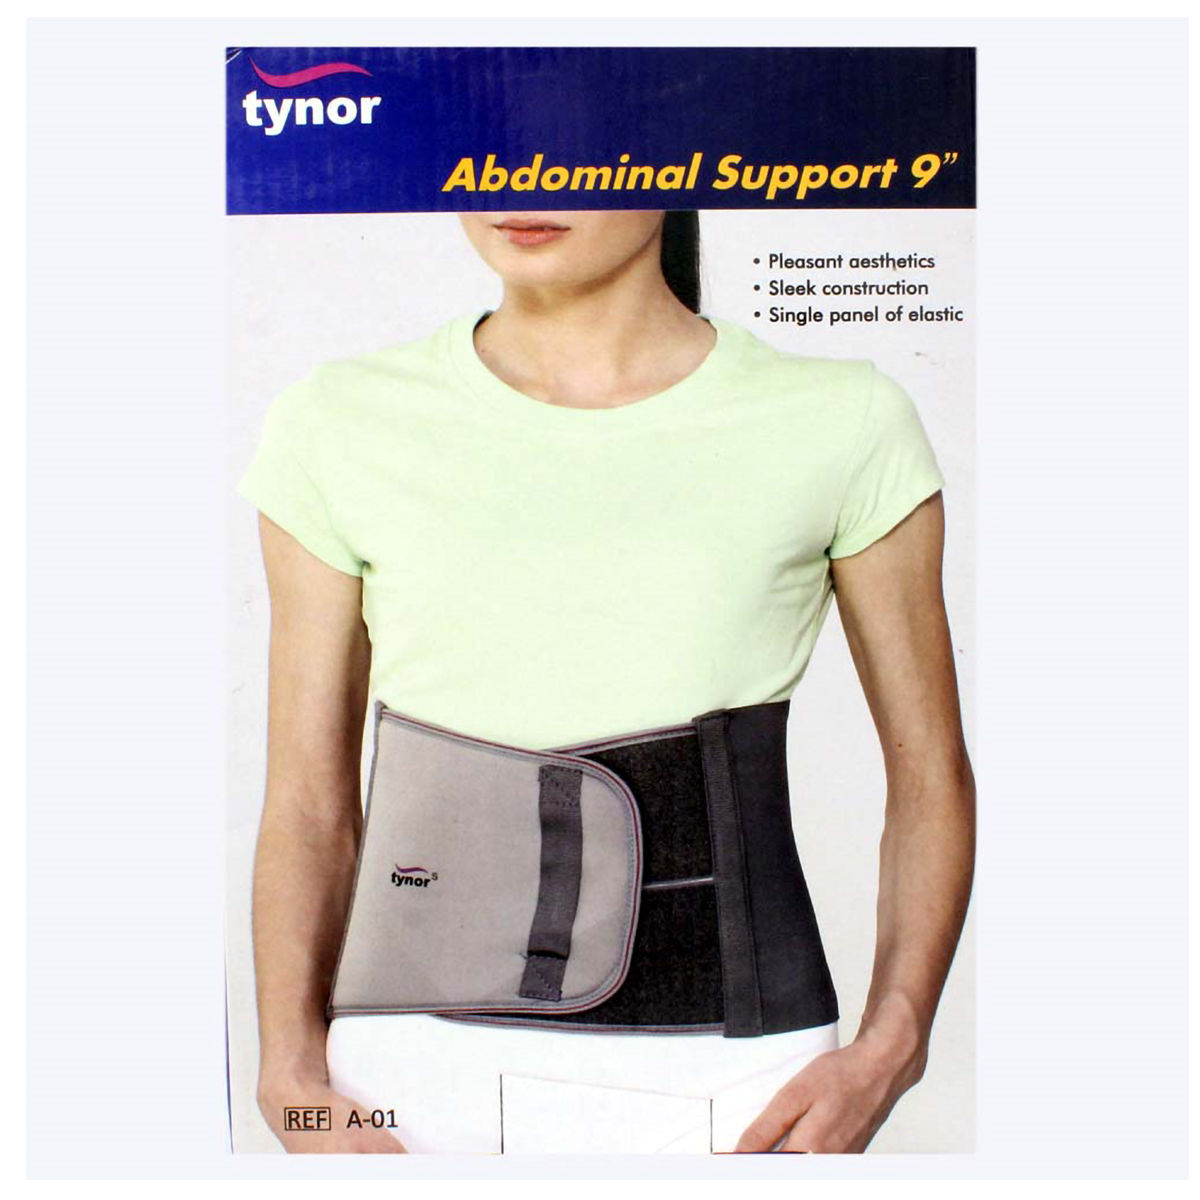 Tynor Abdominal Support 9 Belt Xl, 1 Count Price, Uses, Side Effects,  Composition - Apollo Pharmacy